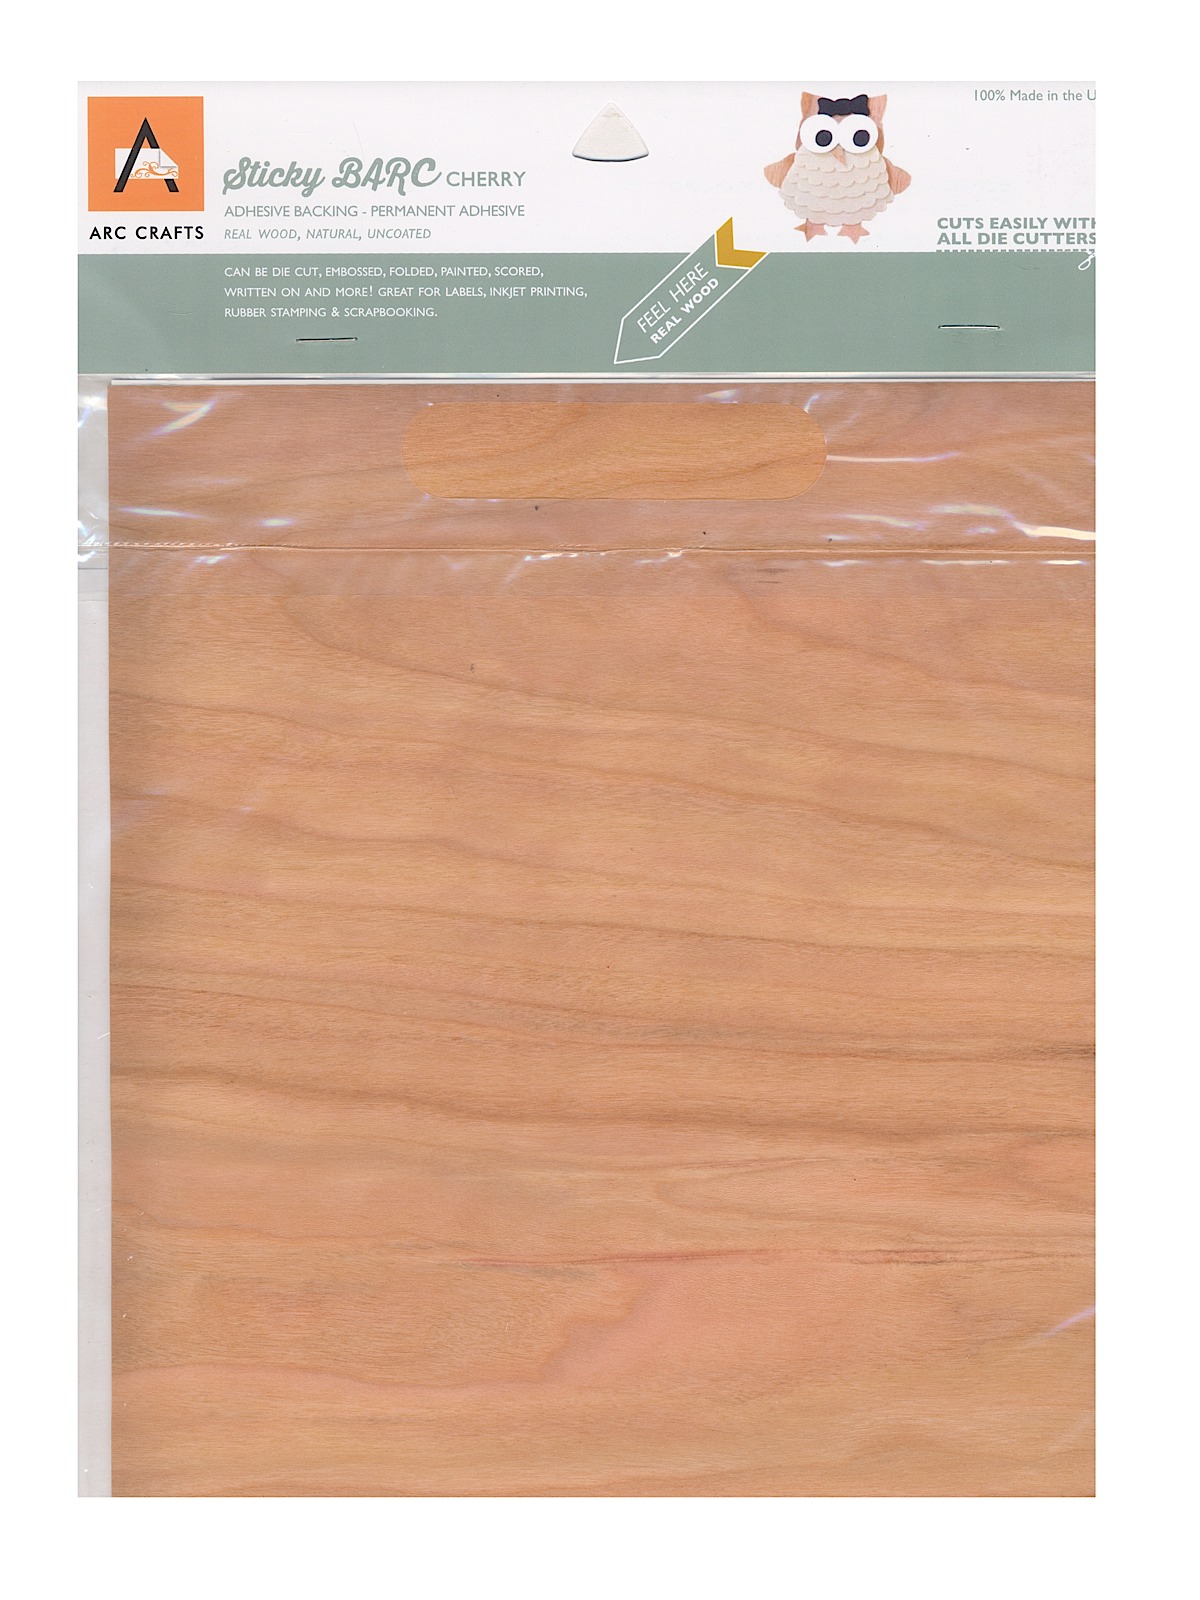 Real Wood Paper Sheets Cherry 8 1 2 In. X 11 In. Adhesive Backing